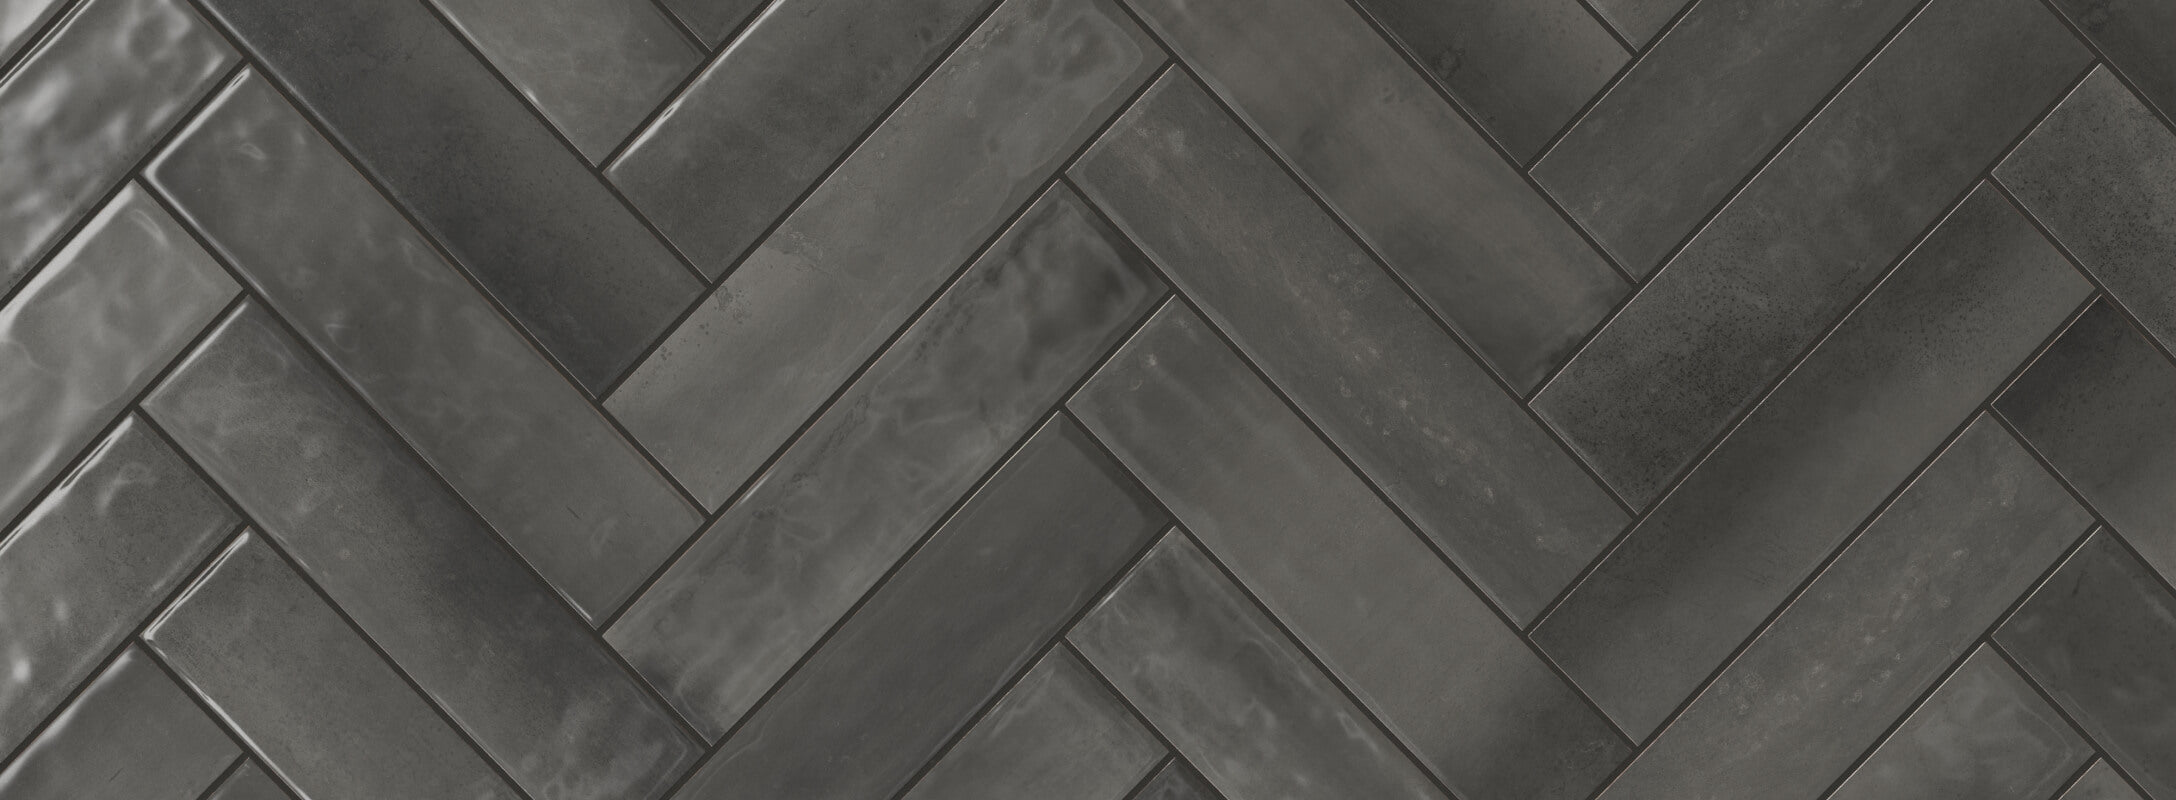 Dark grey herringbone tiles with a sleek, glossy finish create a sophisticated and modern look, perfect for contemporary kitchen walls